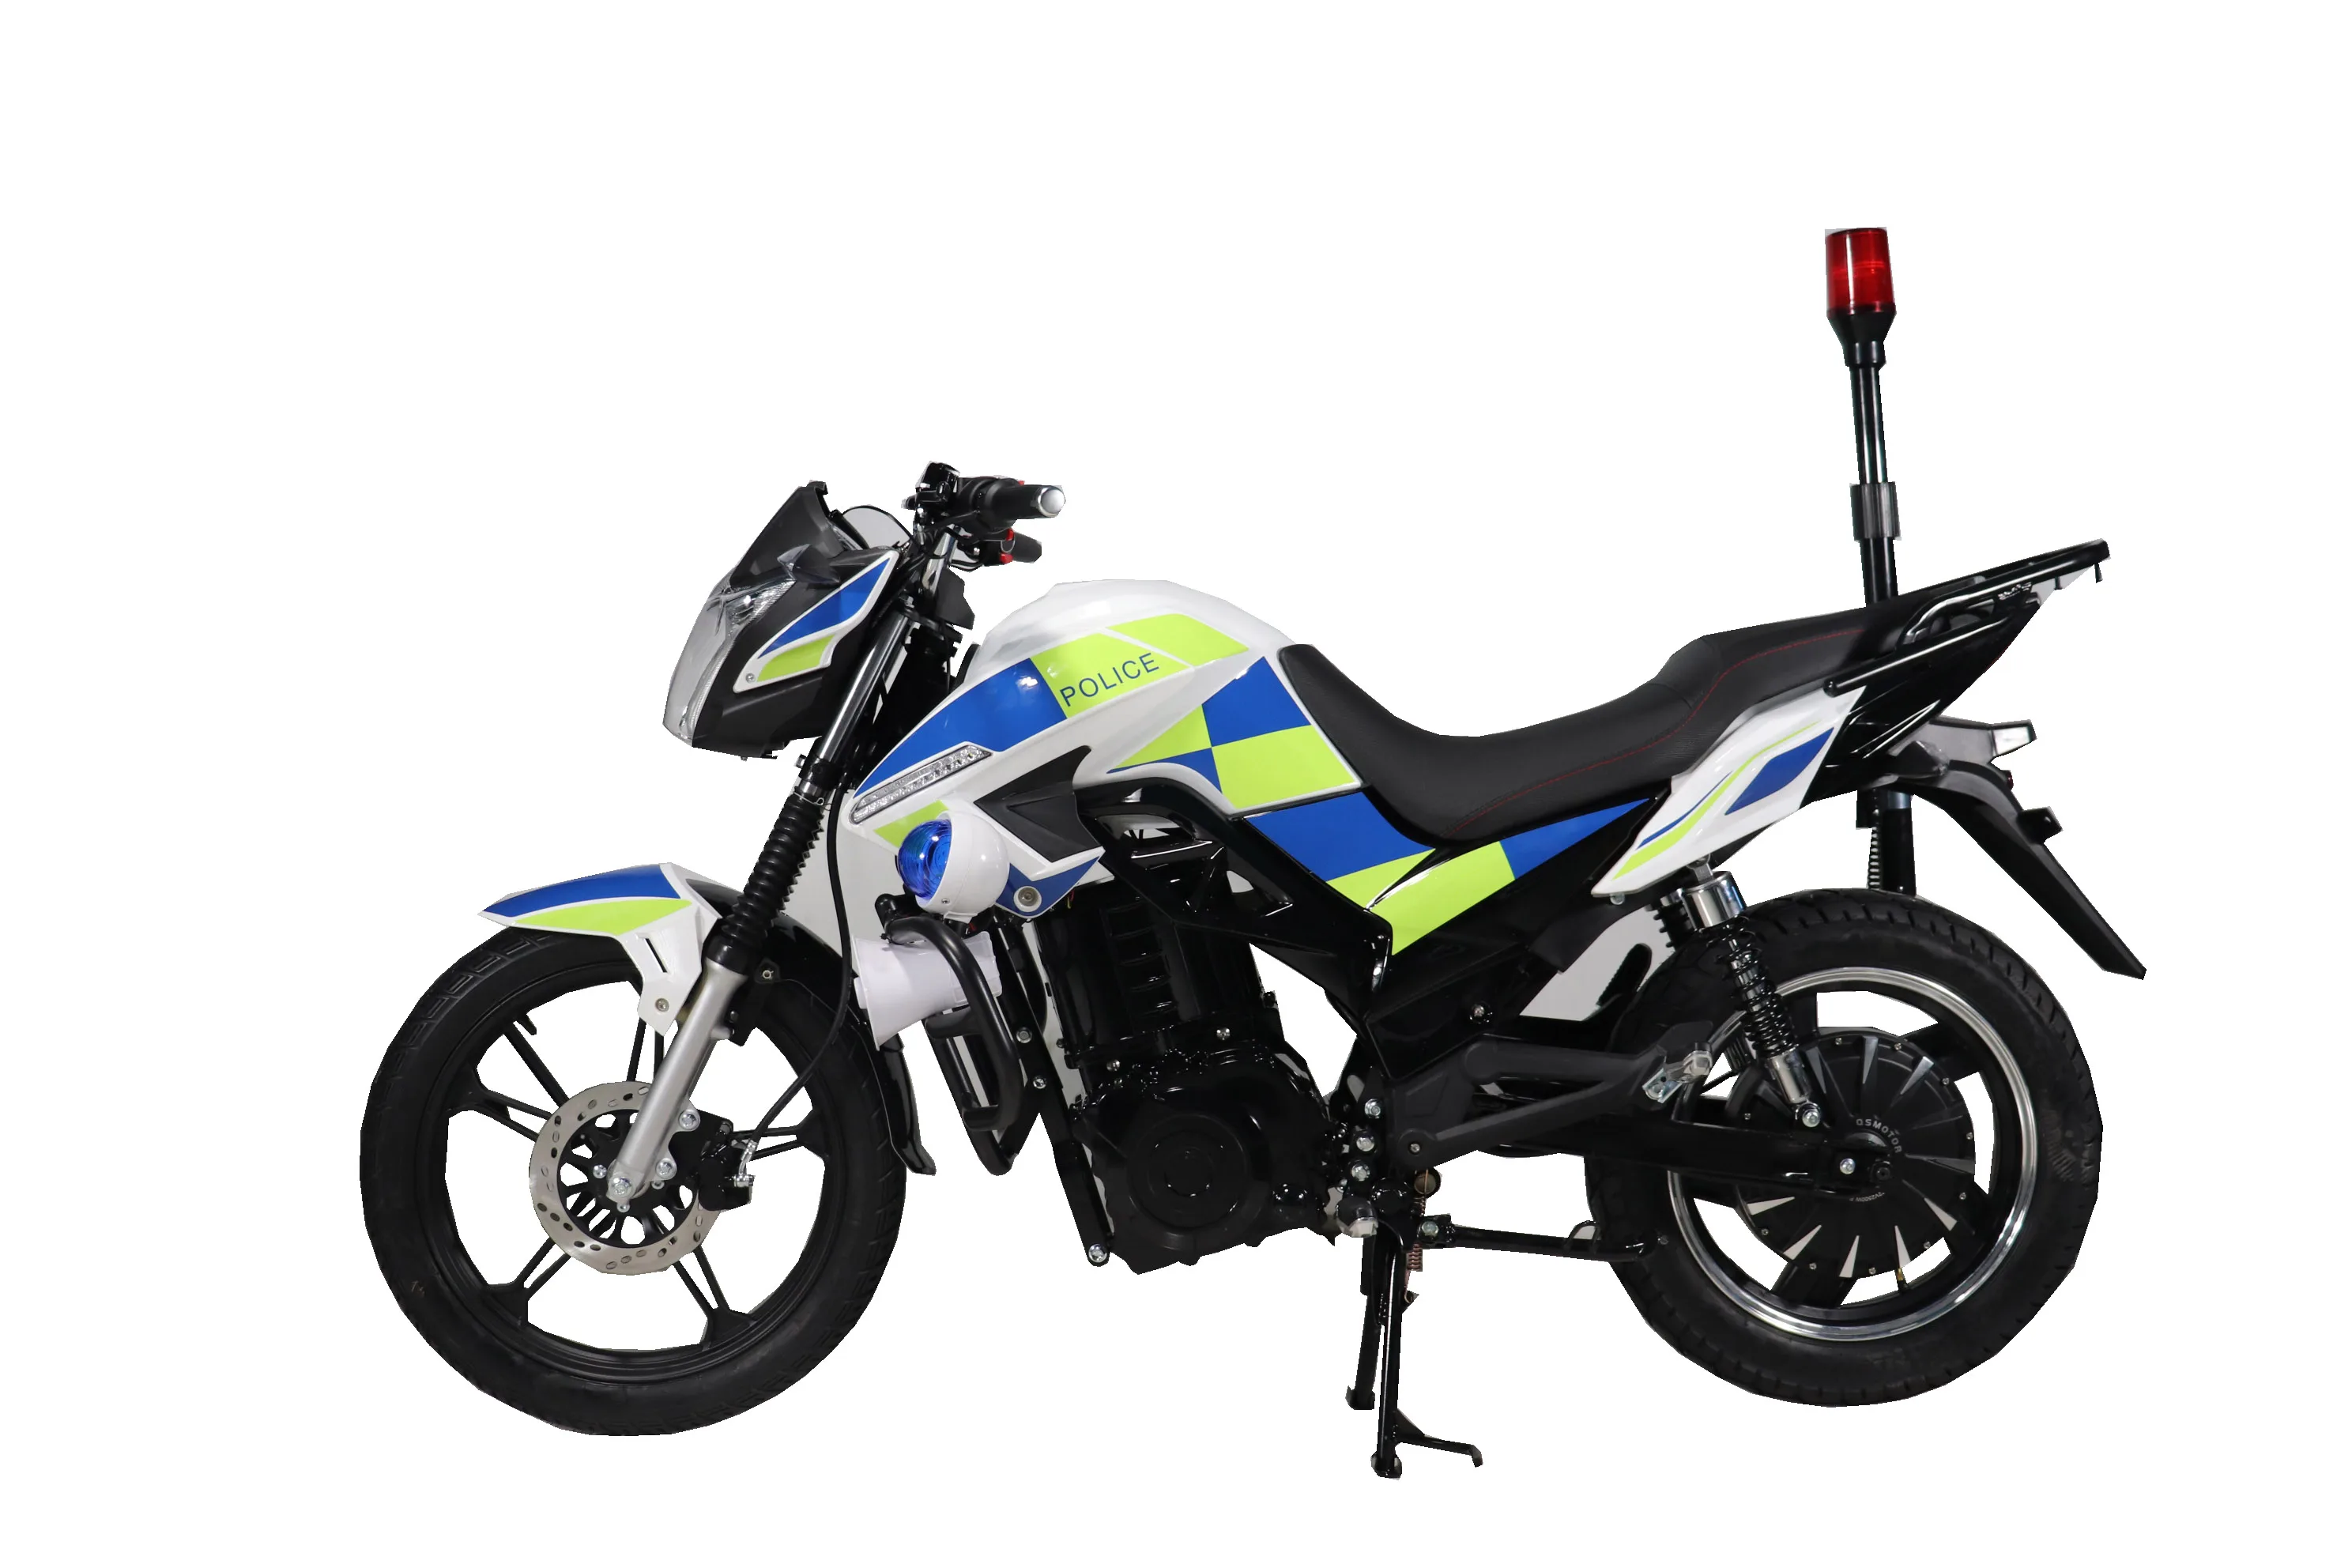 Cheaper Manufacturer direct Sell Cheap Electric Motorcycle with LED